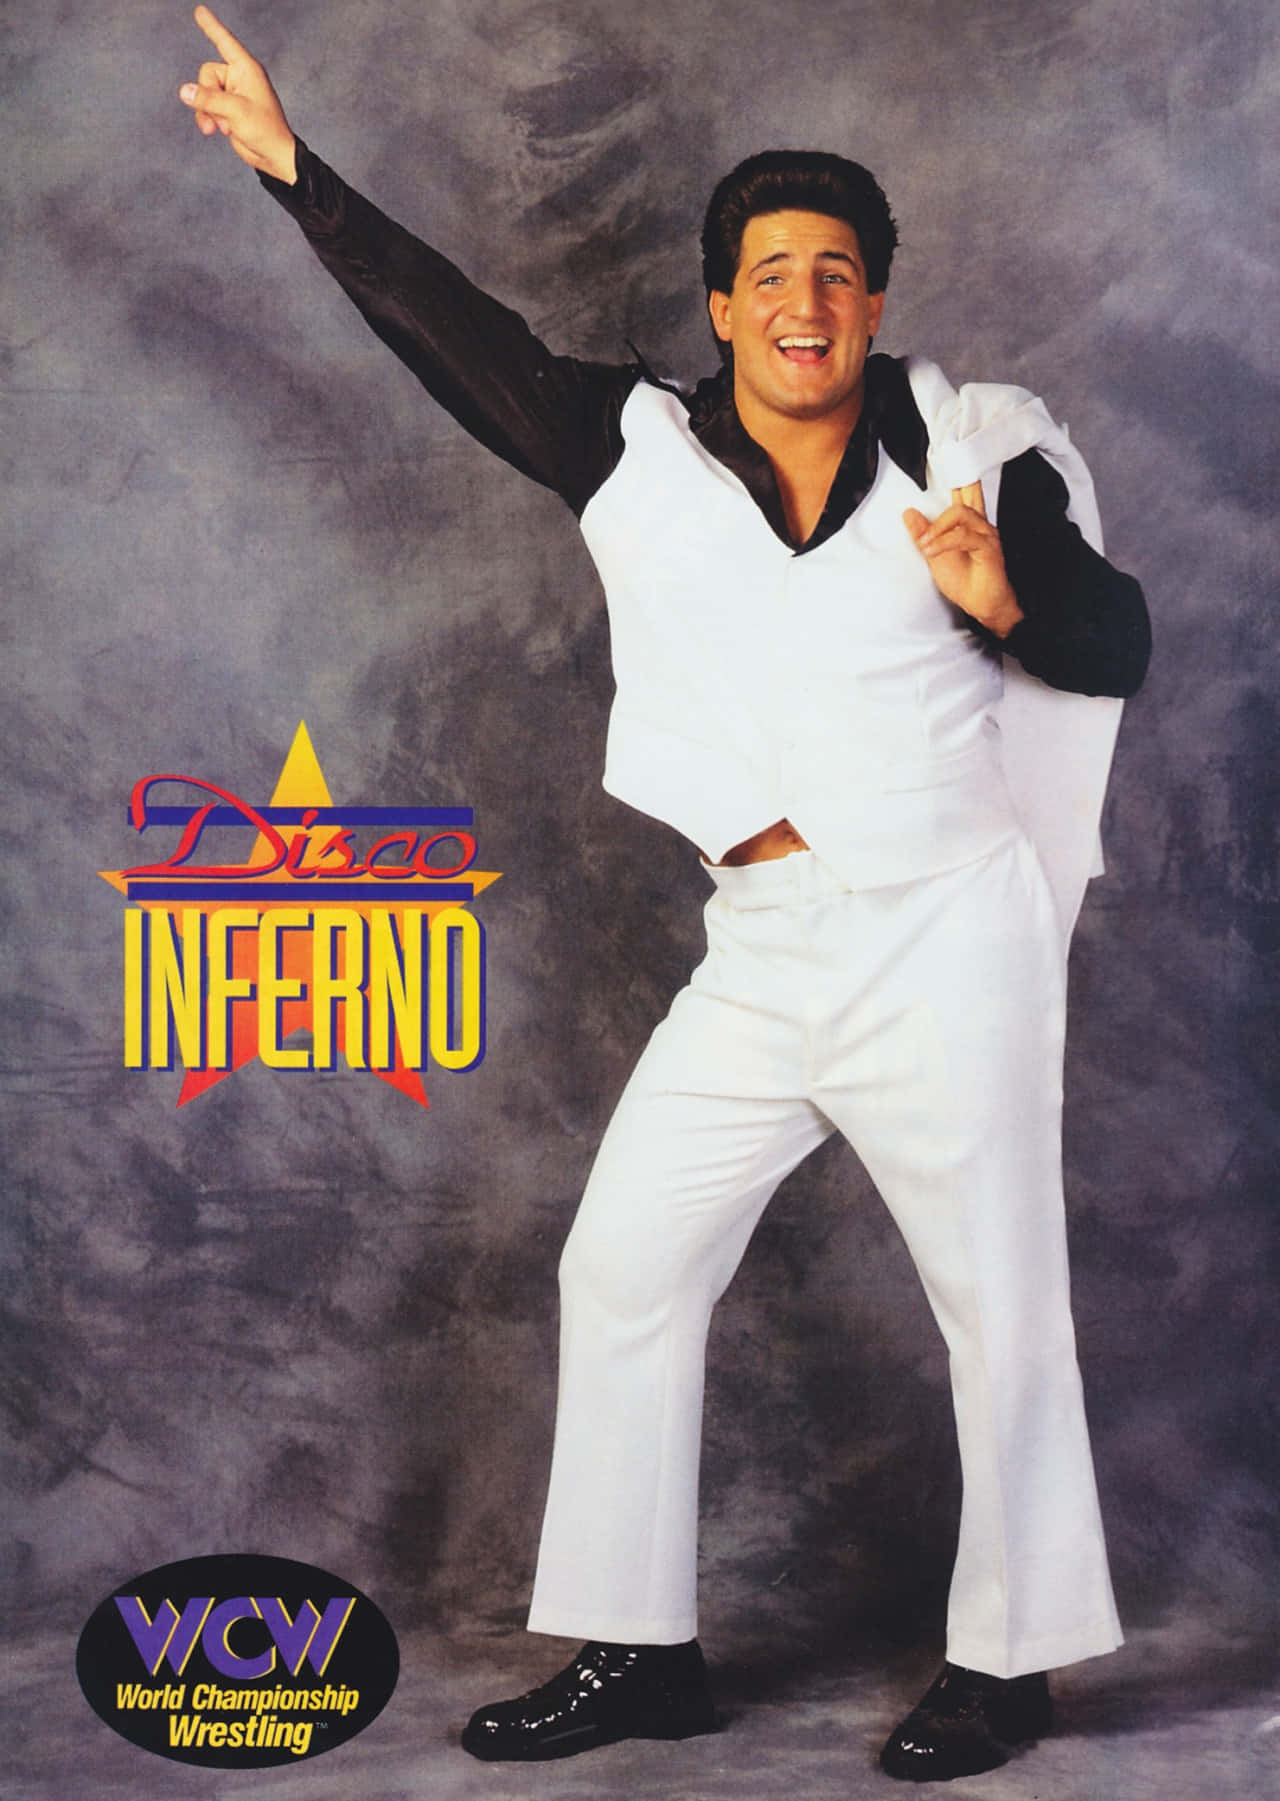 Caption: American Professional Wrestler, Disco Inferno, in WCW Photoshoot Wallpaper